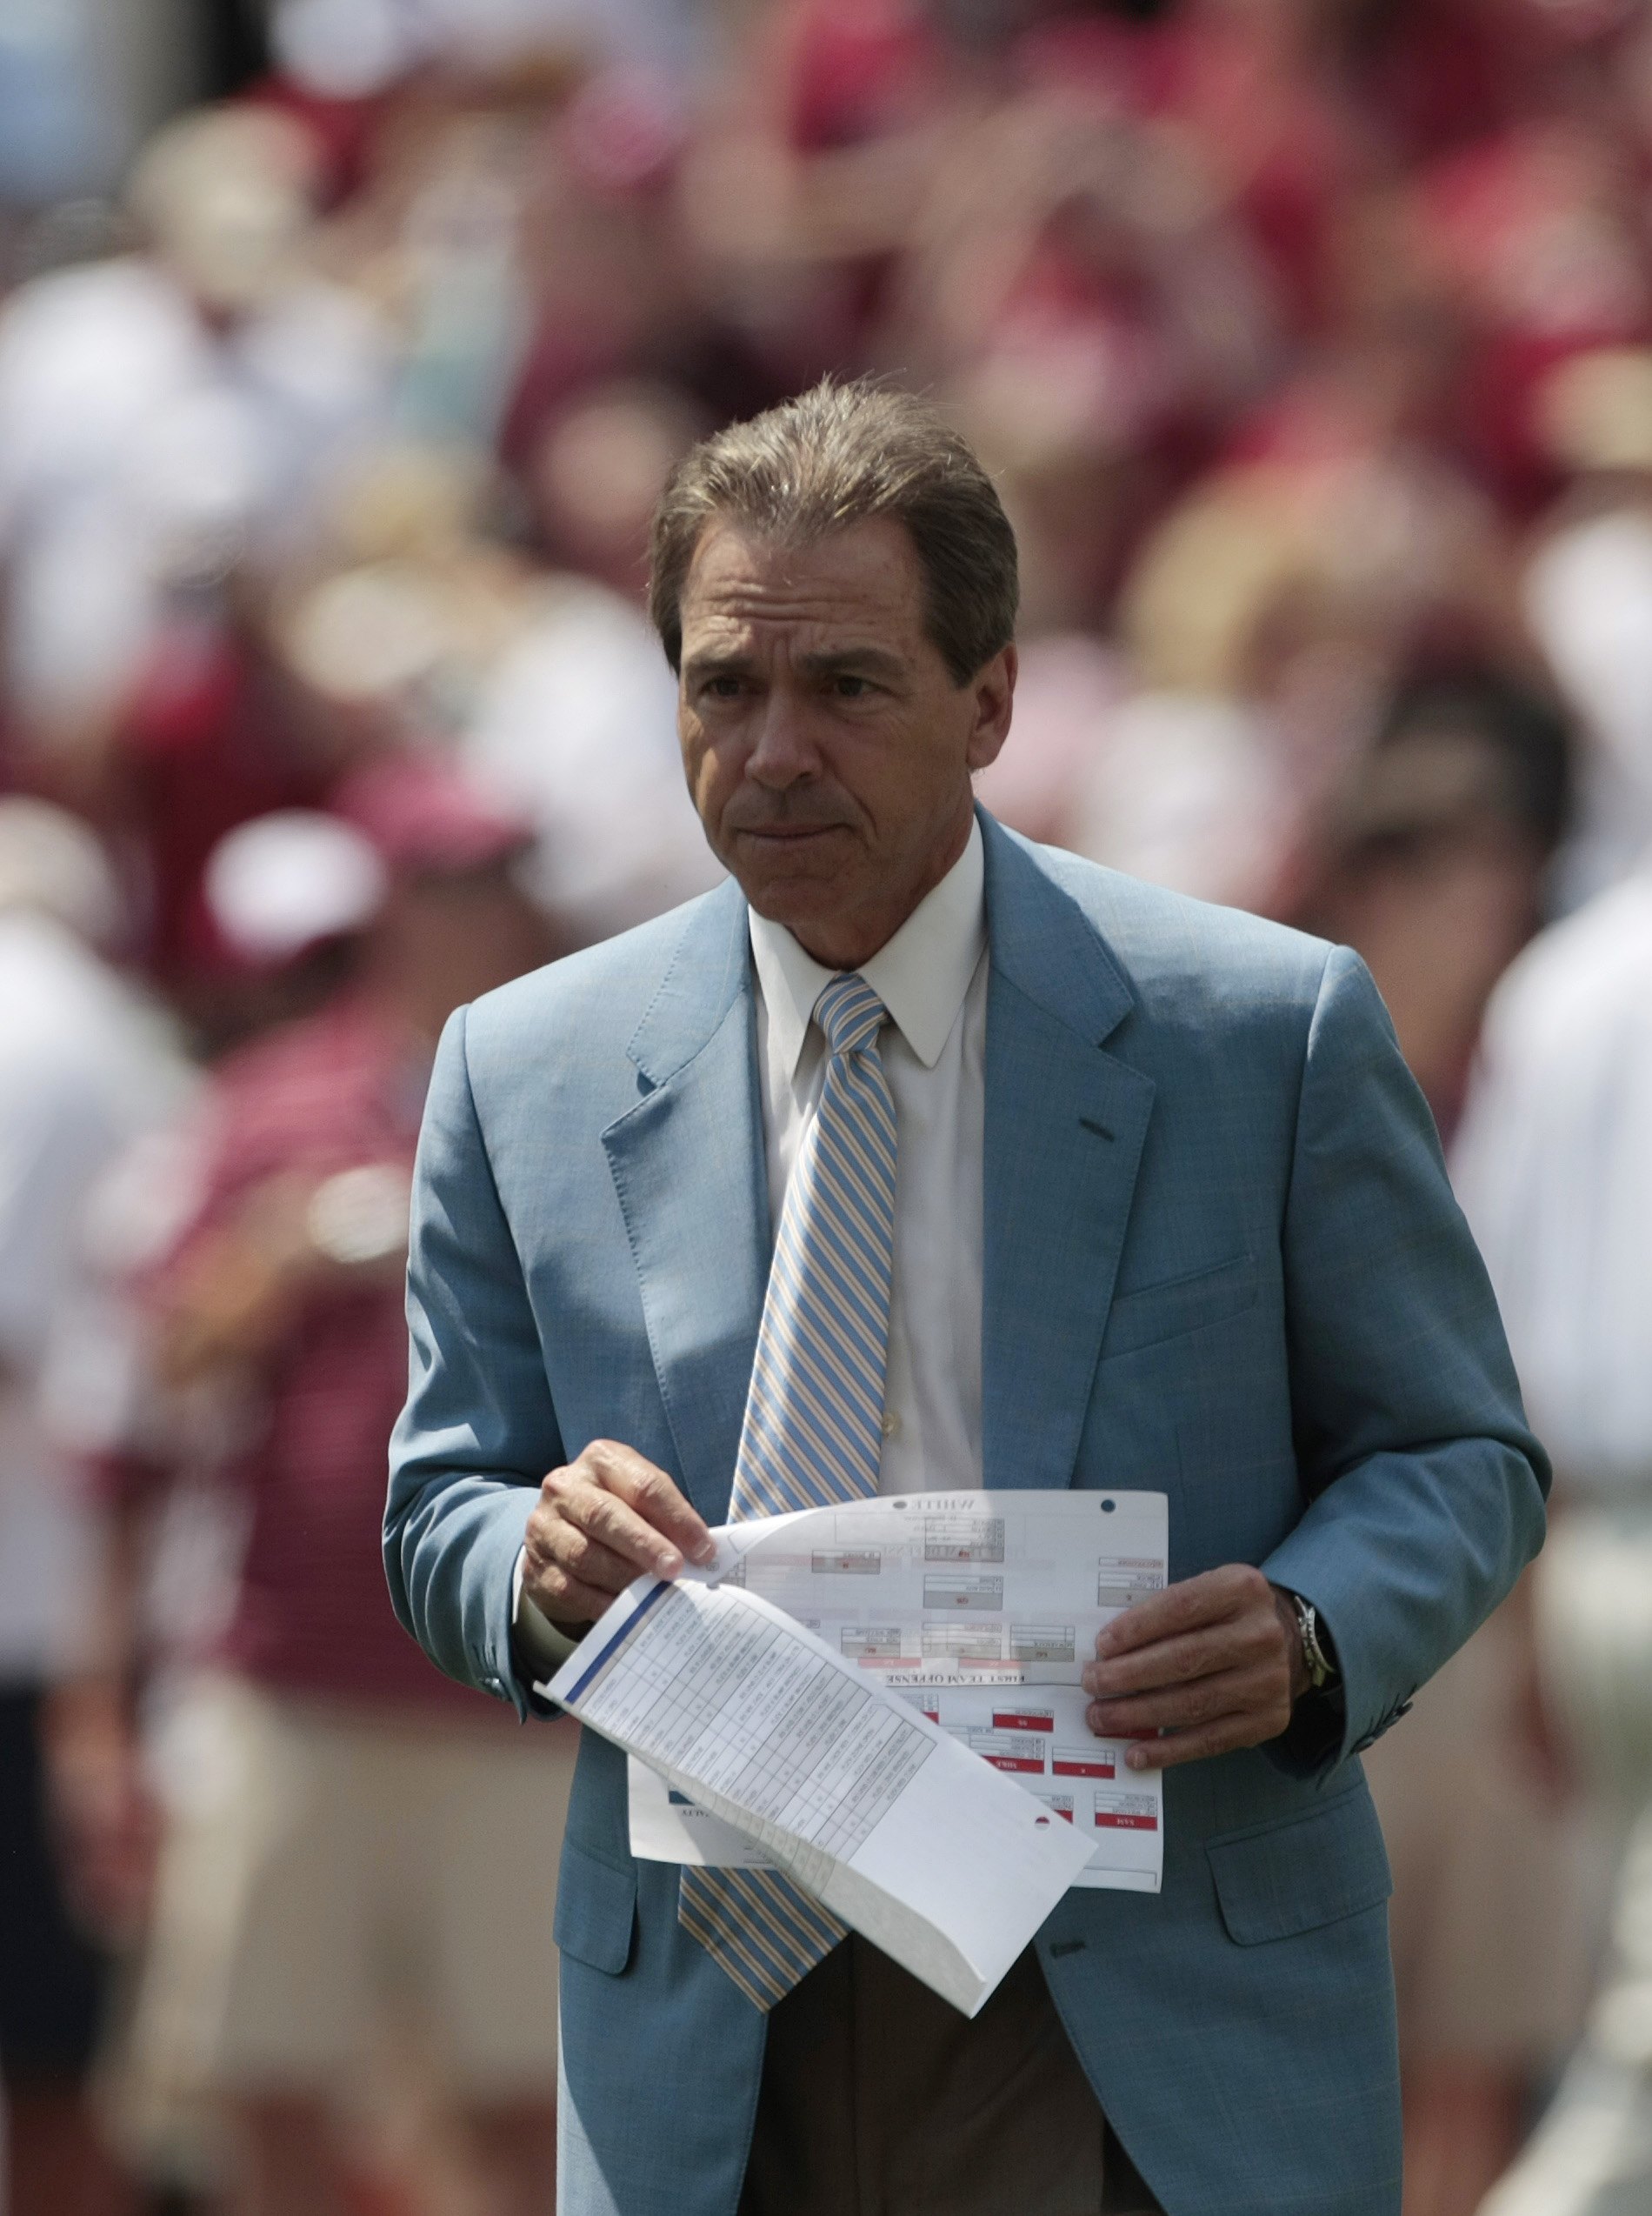 TUSCALOOSA, AL - APRIL 17:  Coach Nick Saban of the Alabama Crimson Tide watches during the Alabama spring game at Bryant Denny Stadium on April 17, 2010 in Tuscaloosa, Alabama. (Photo by Dave Martin/Getty Images)